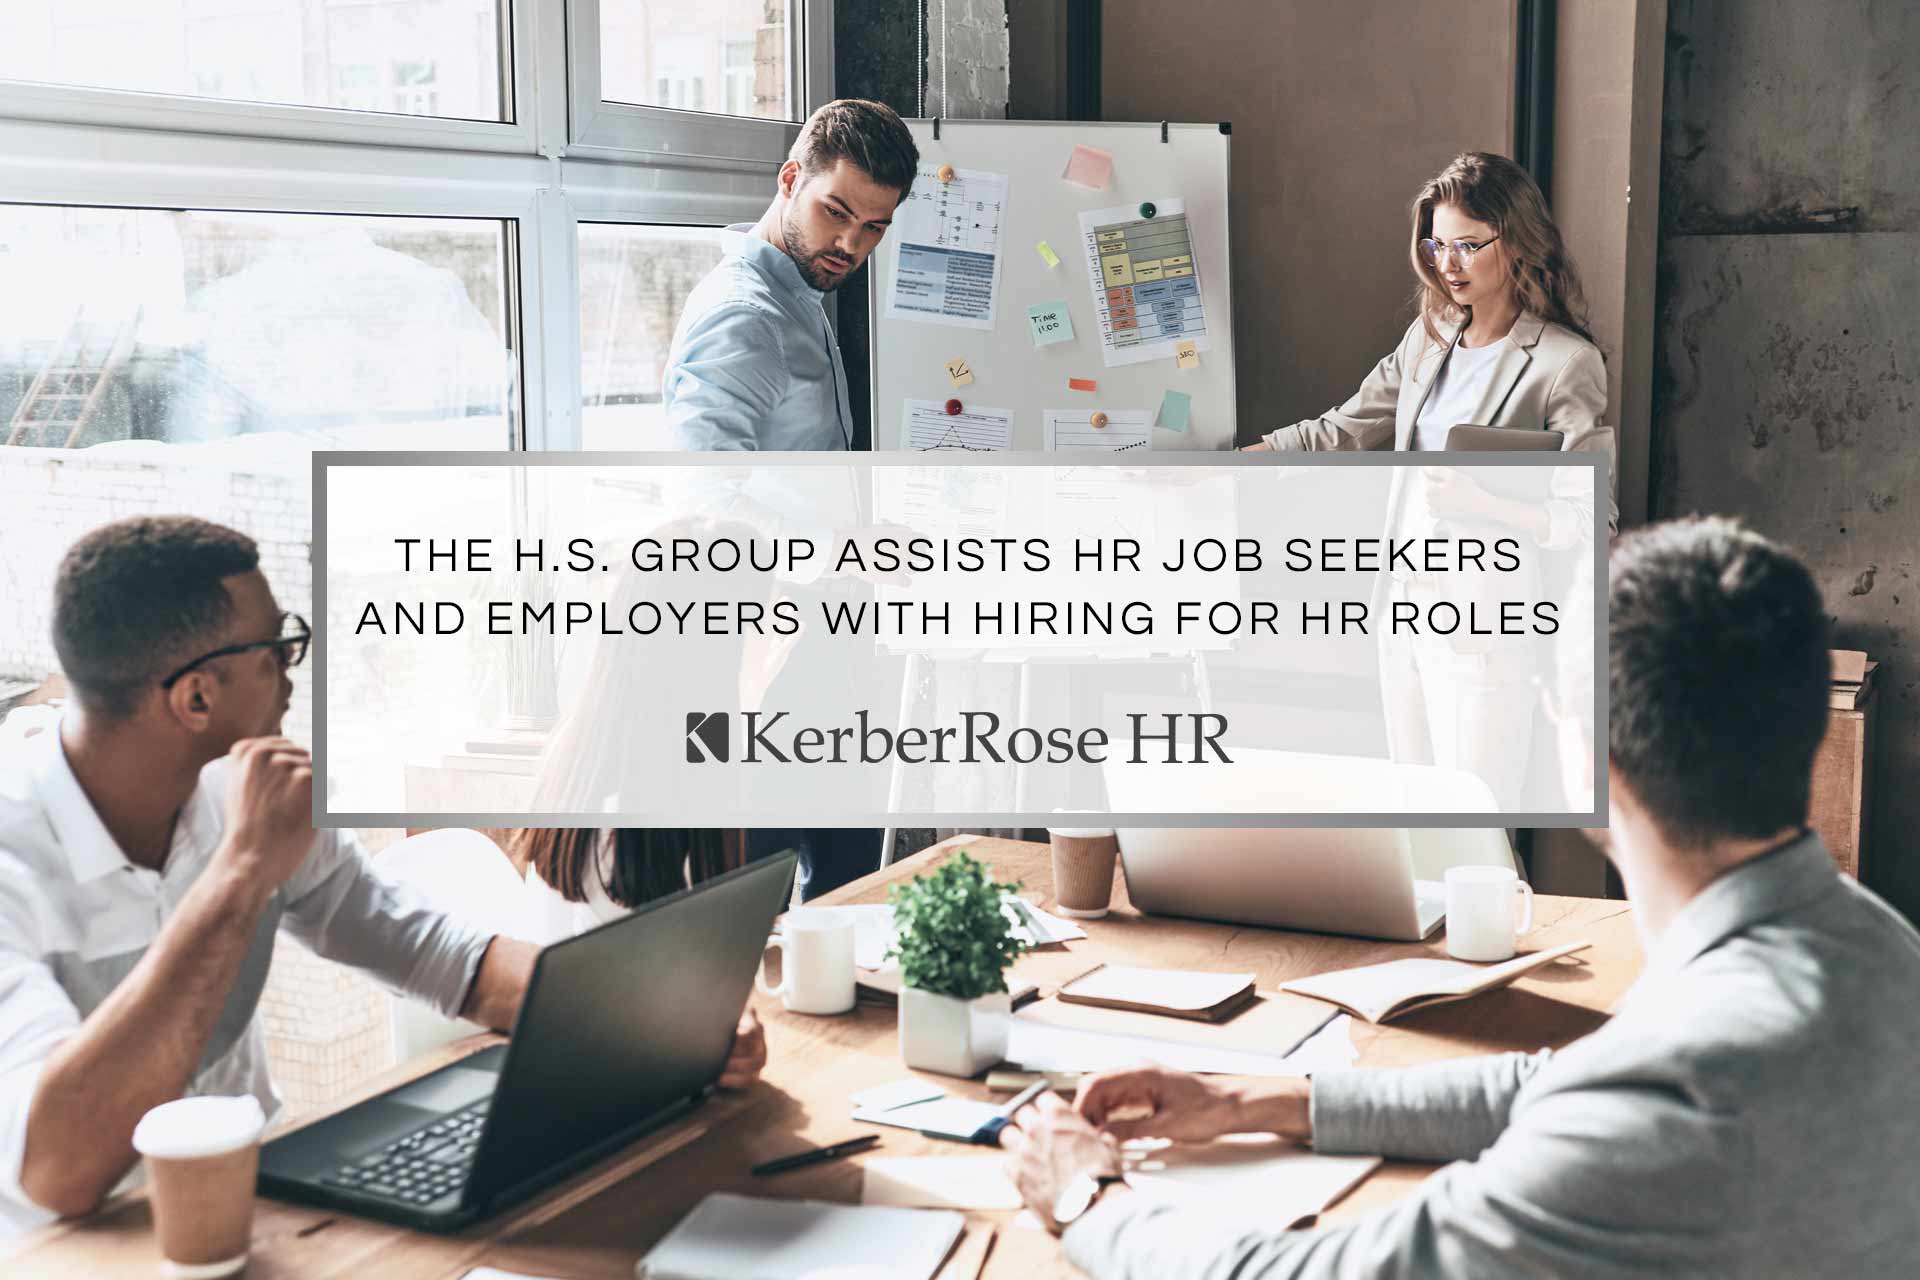 The H.S Group Assists HR Job Seekers and Employers with Hiring for HR Roles | KerberRose HR